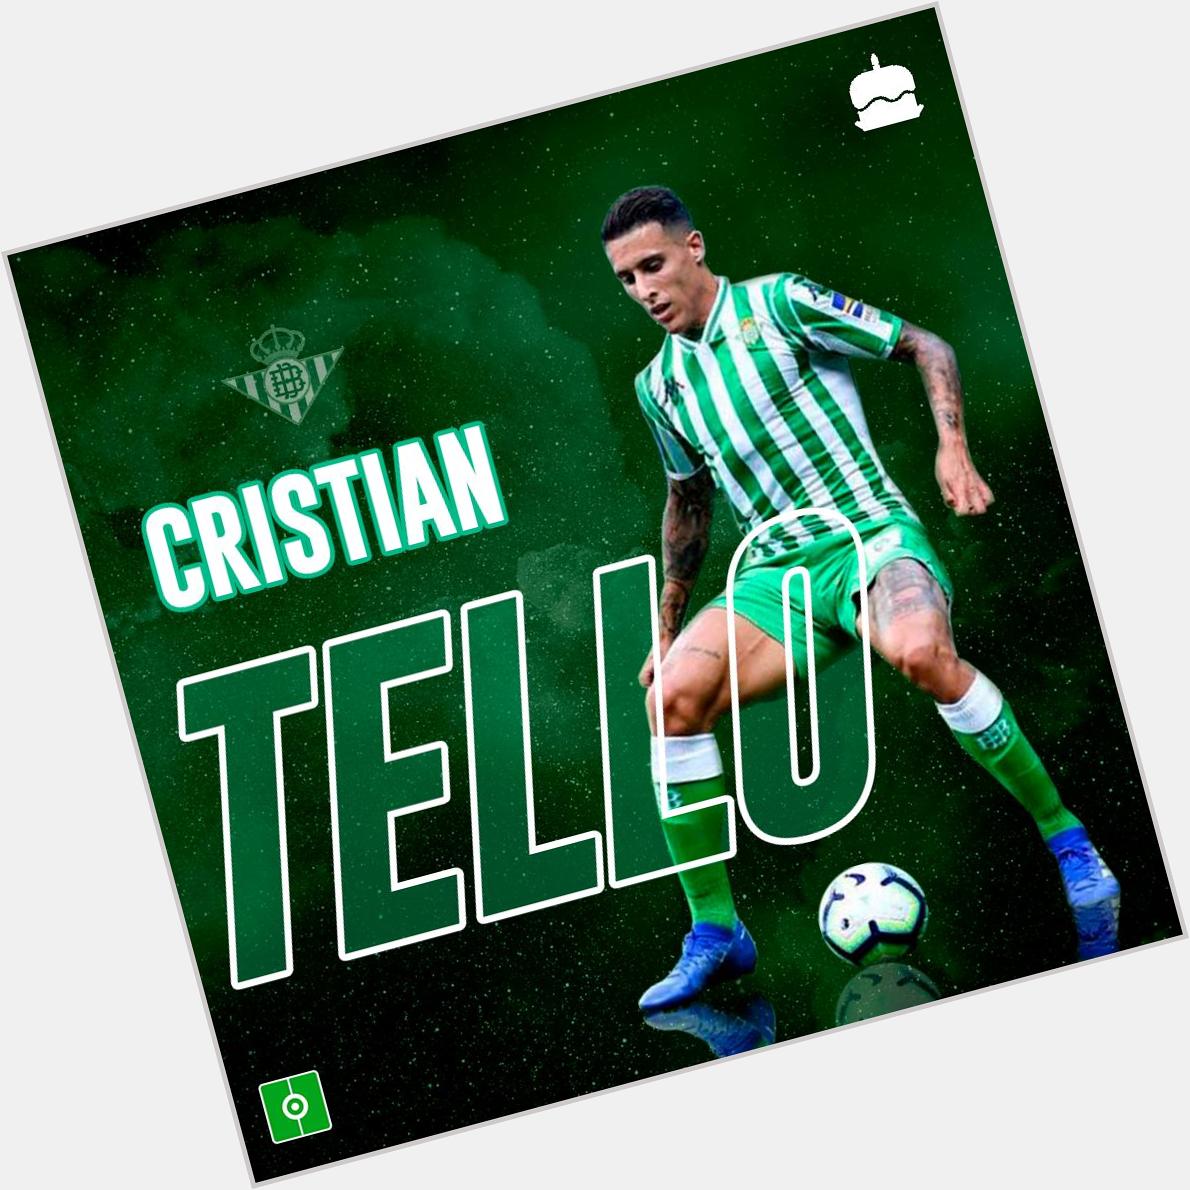 Ex-Barca player Cristian Tello, now at Betis, has turned 28. Happy birthday!   